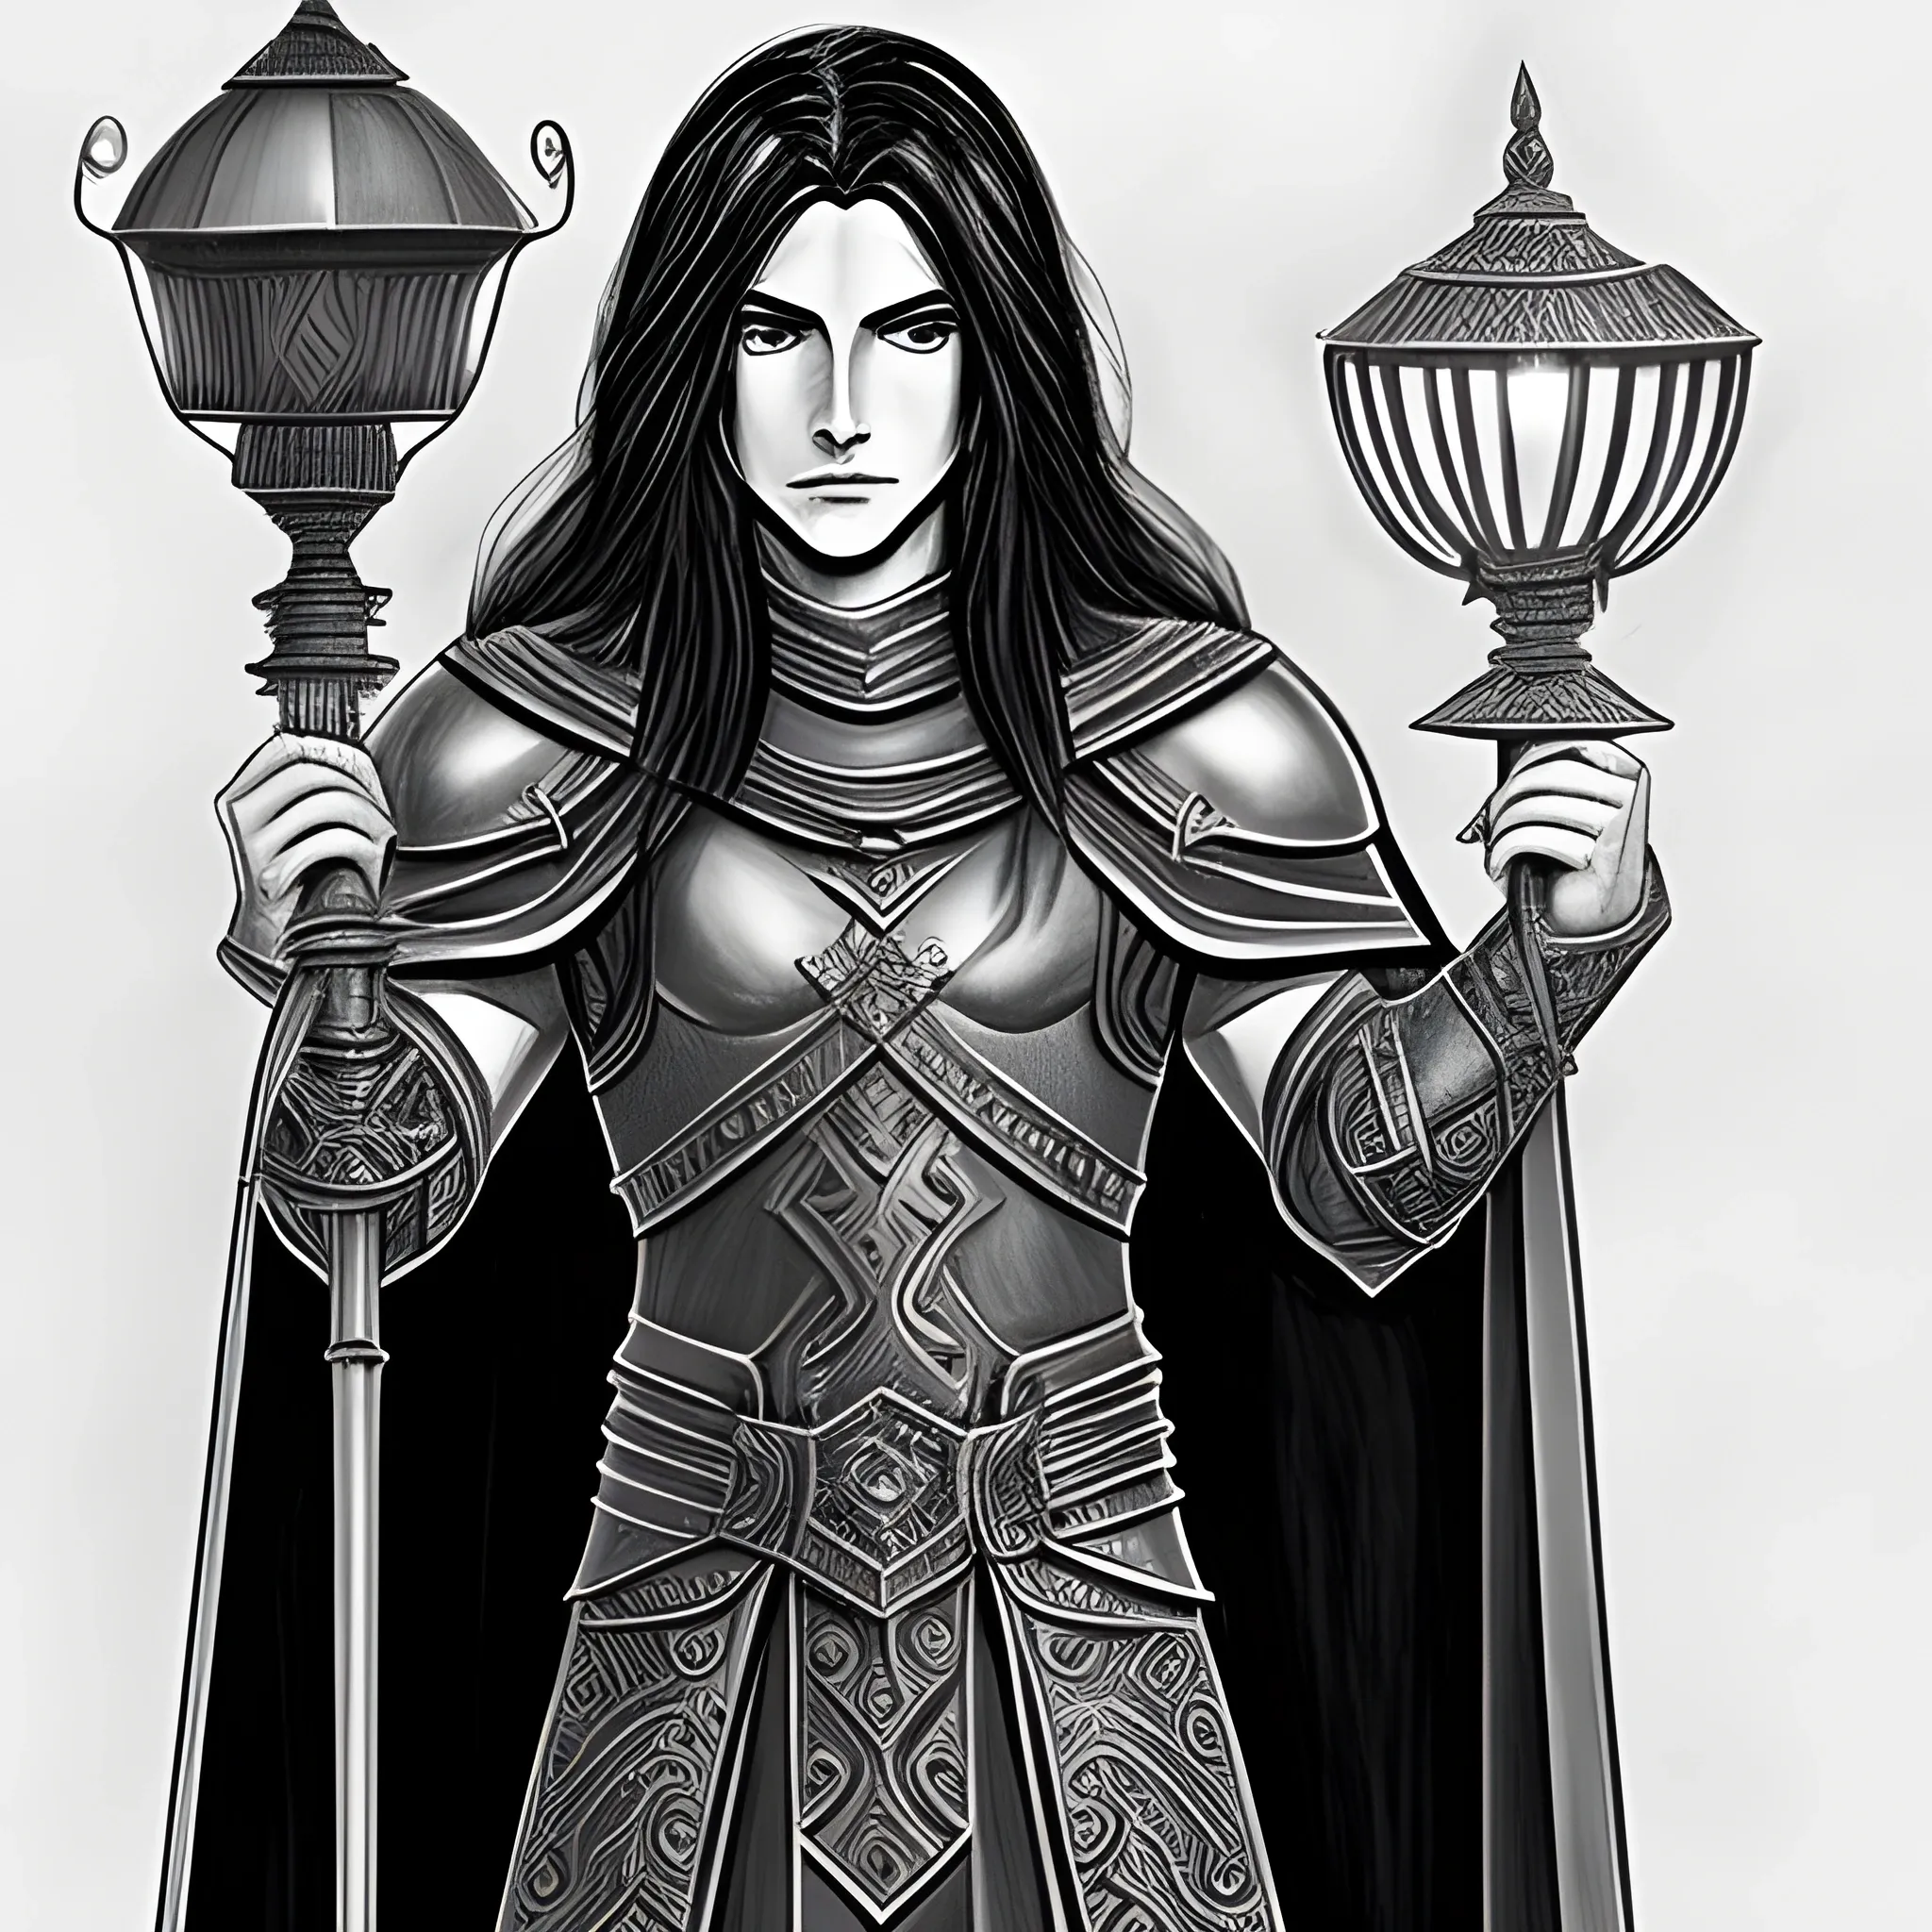 long black haired, male, aasimar, leather armor, cape holding a djinni lamp
, Pencil Sketch, Cartoon